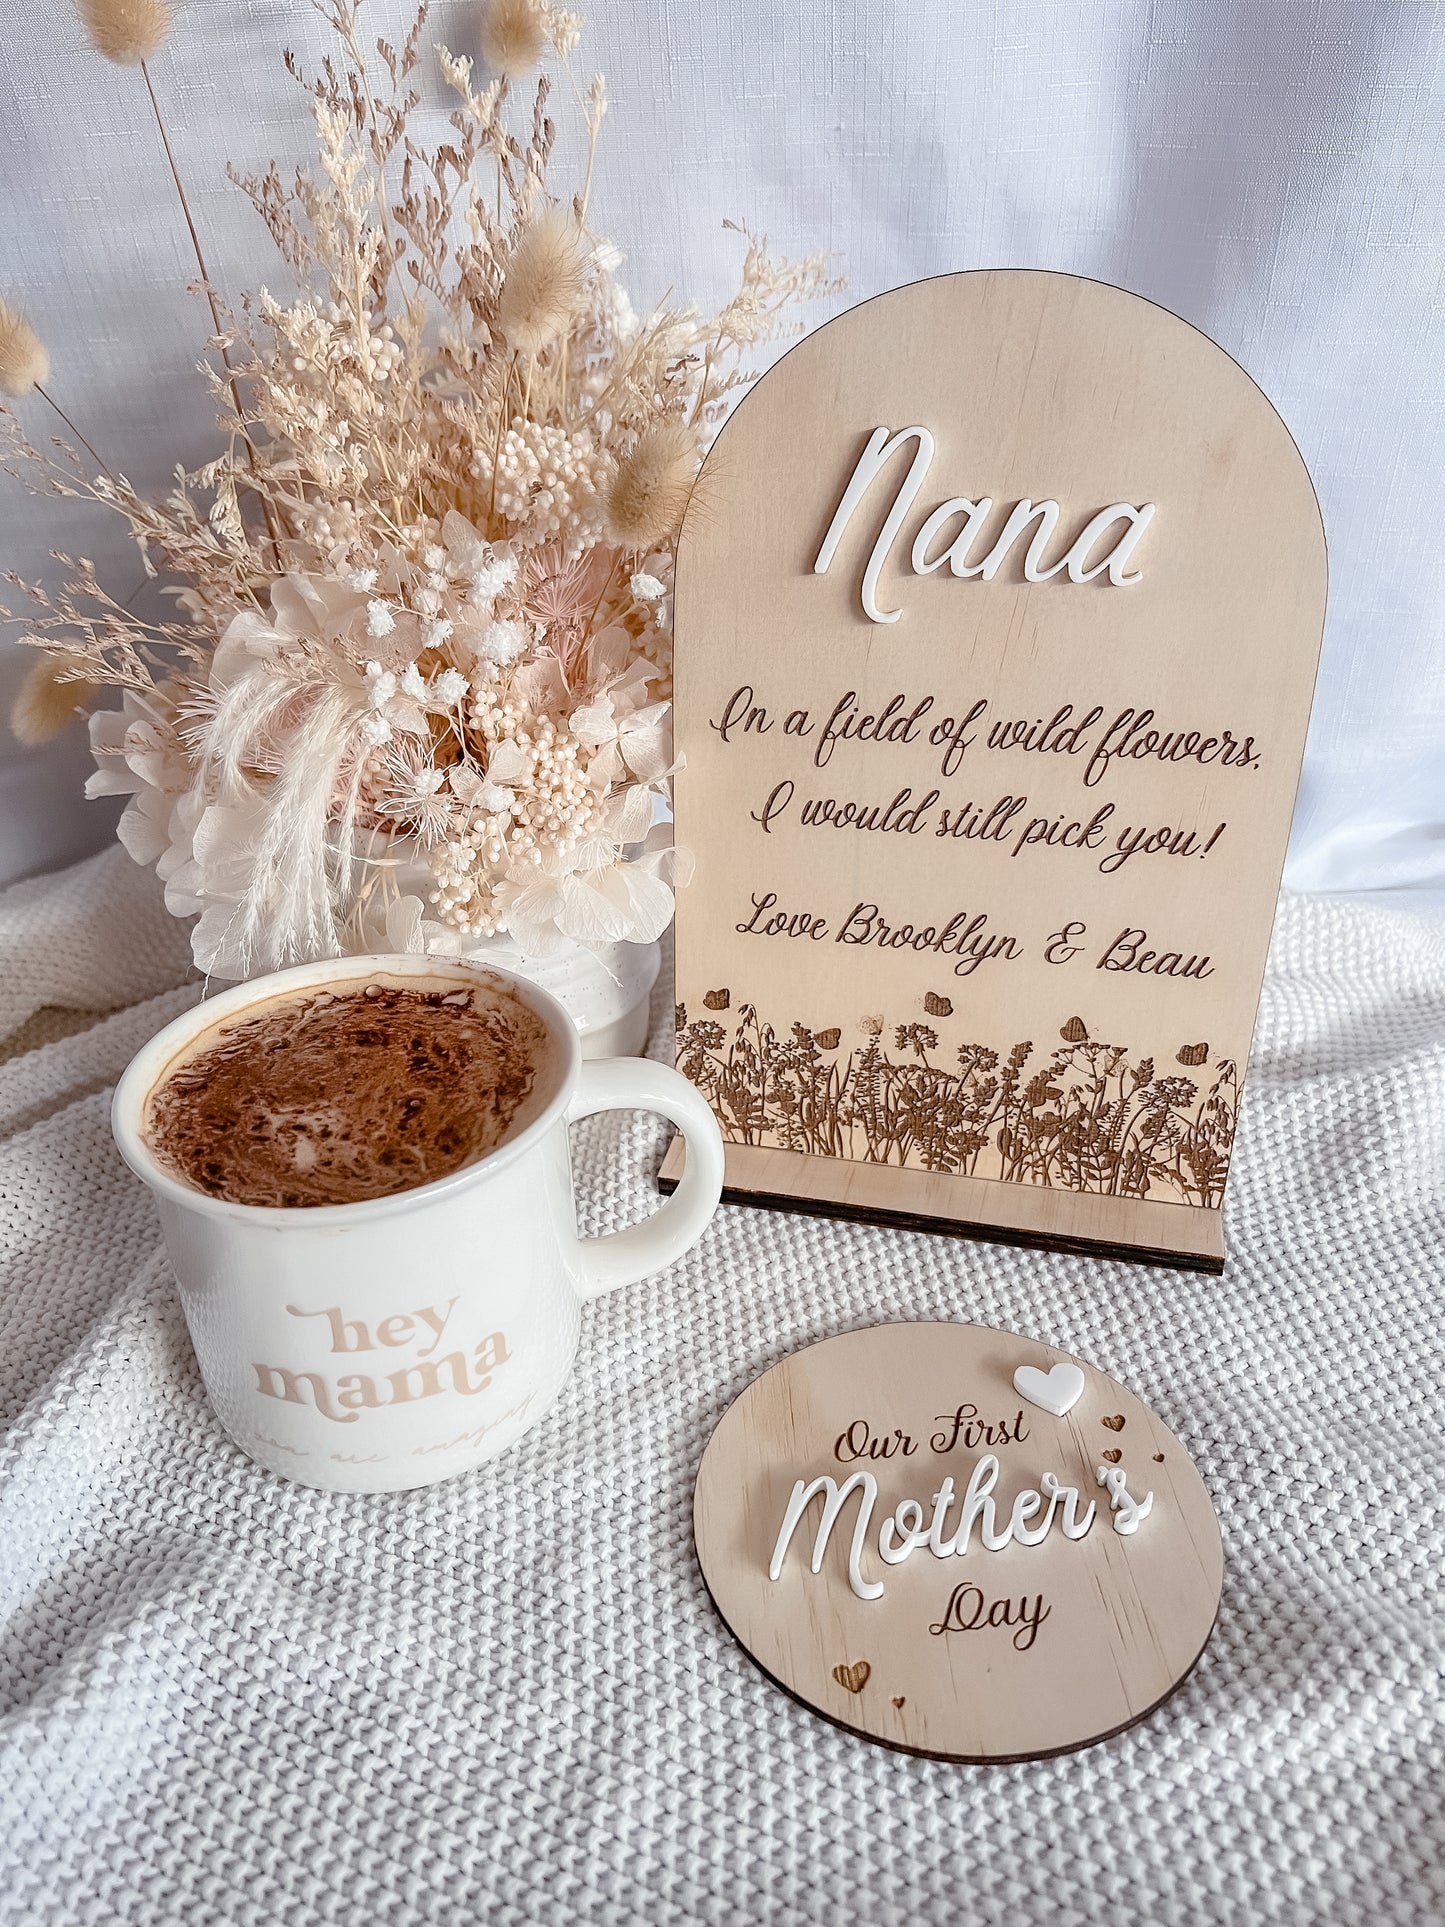 Wooden "Our First Mother's Day" Plaque